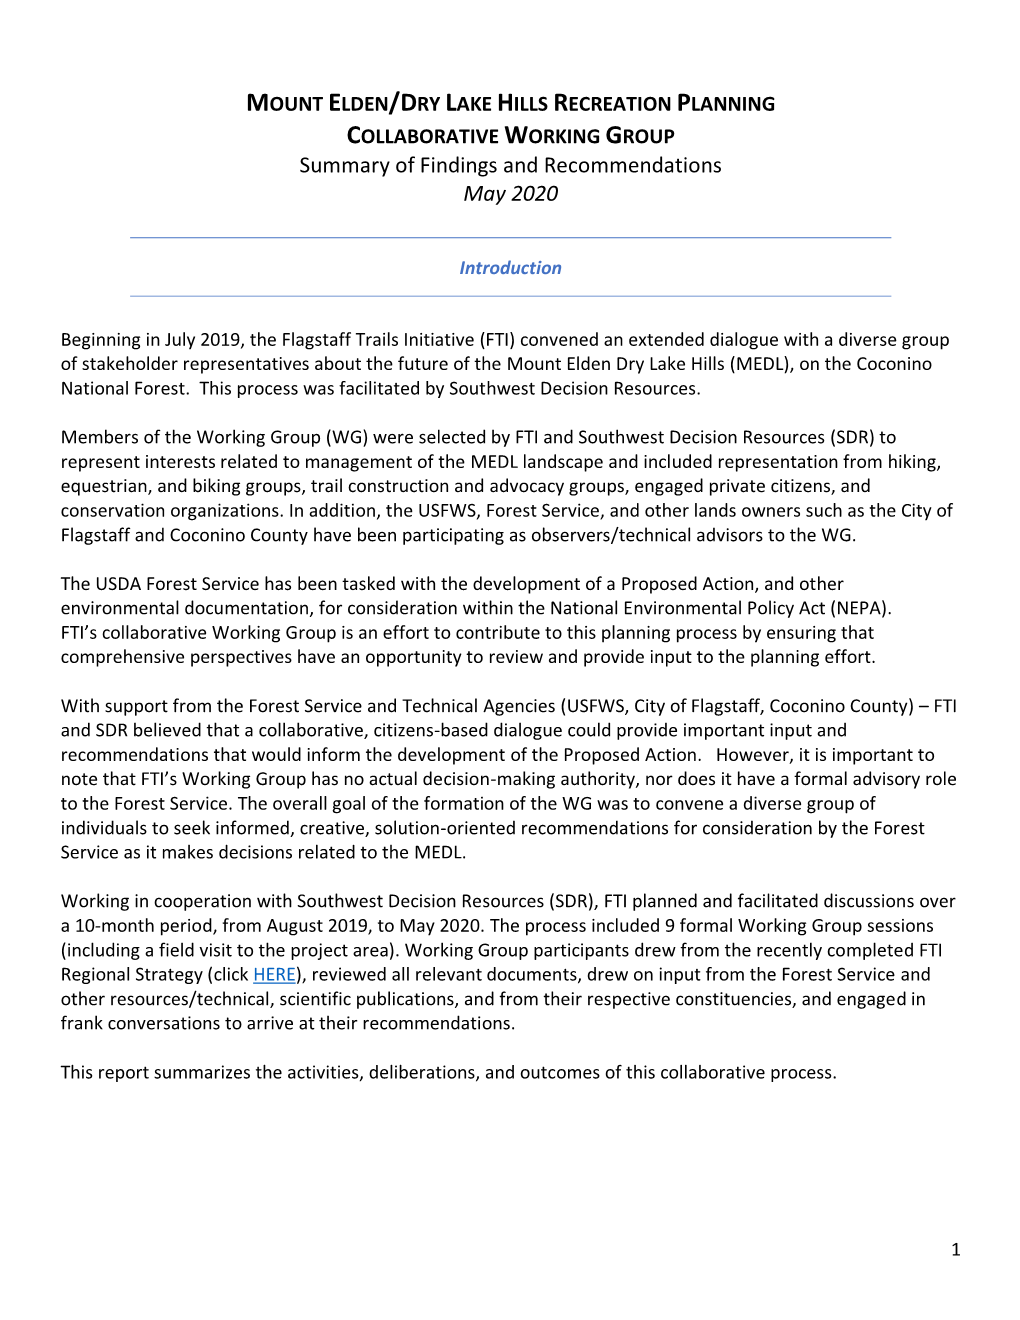 Summary of Findings and Recommendations May 2020